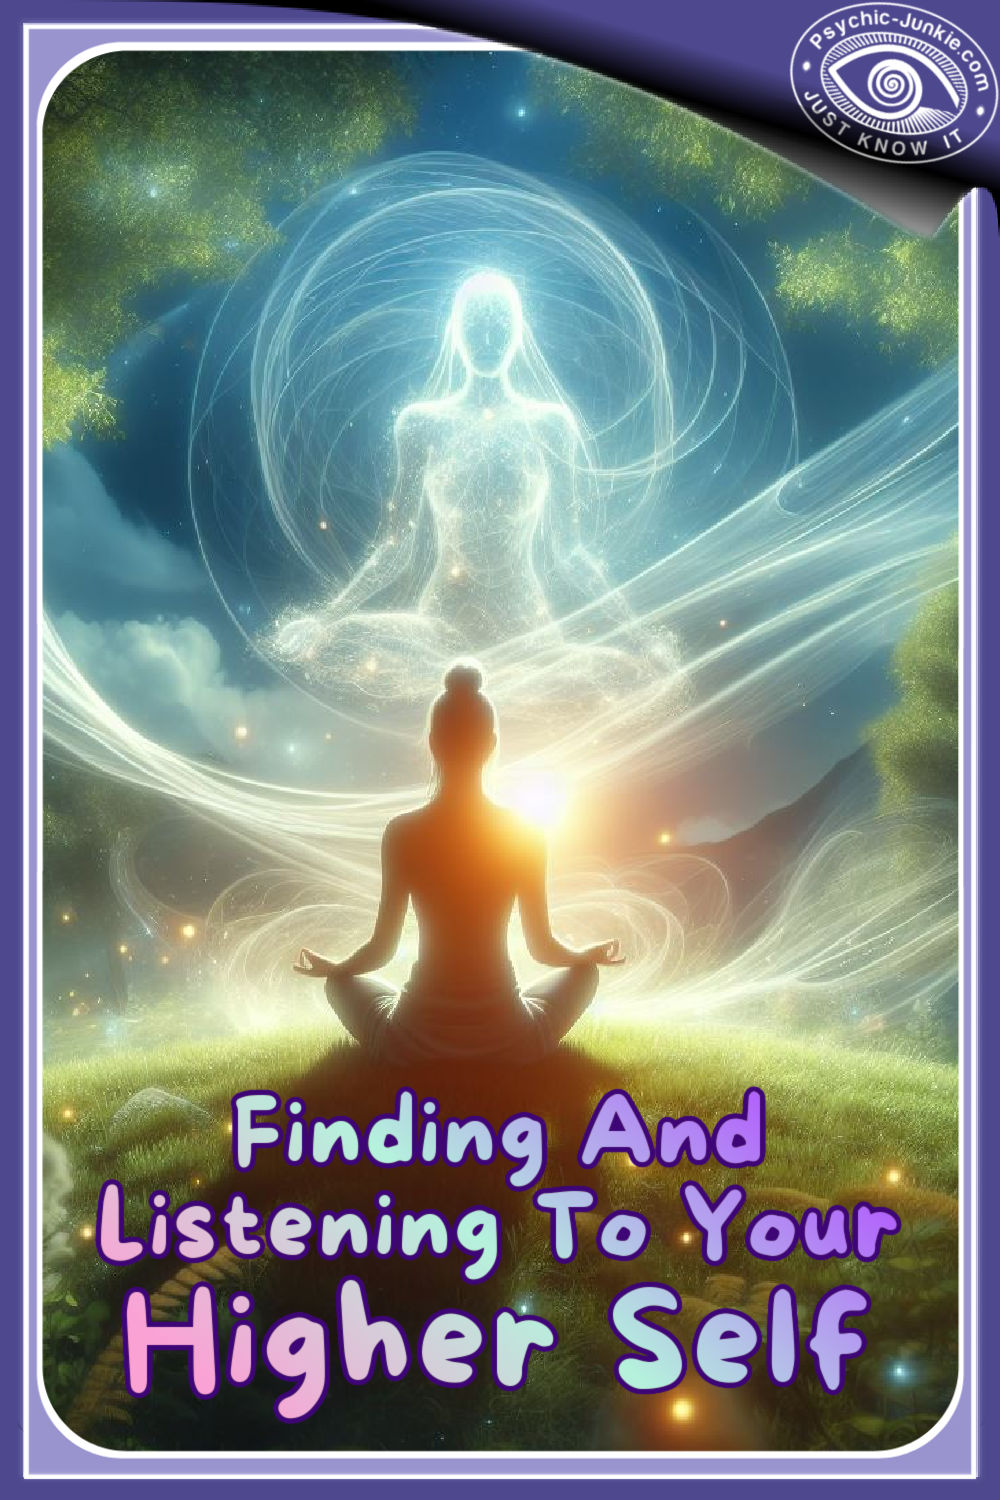 Finding and listening to your Higher Self